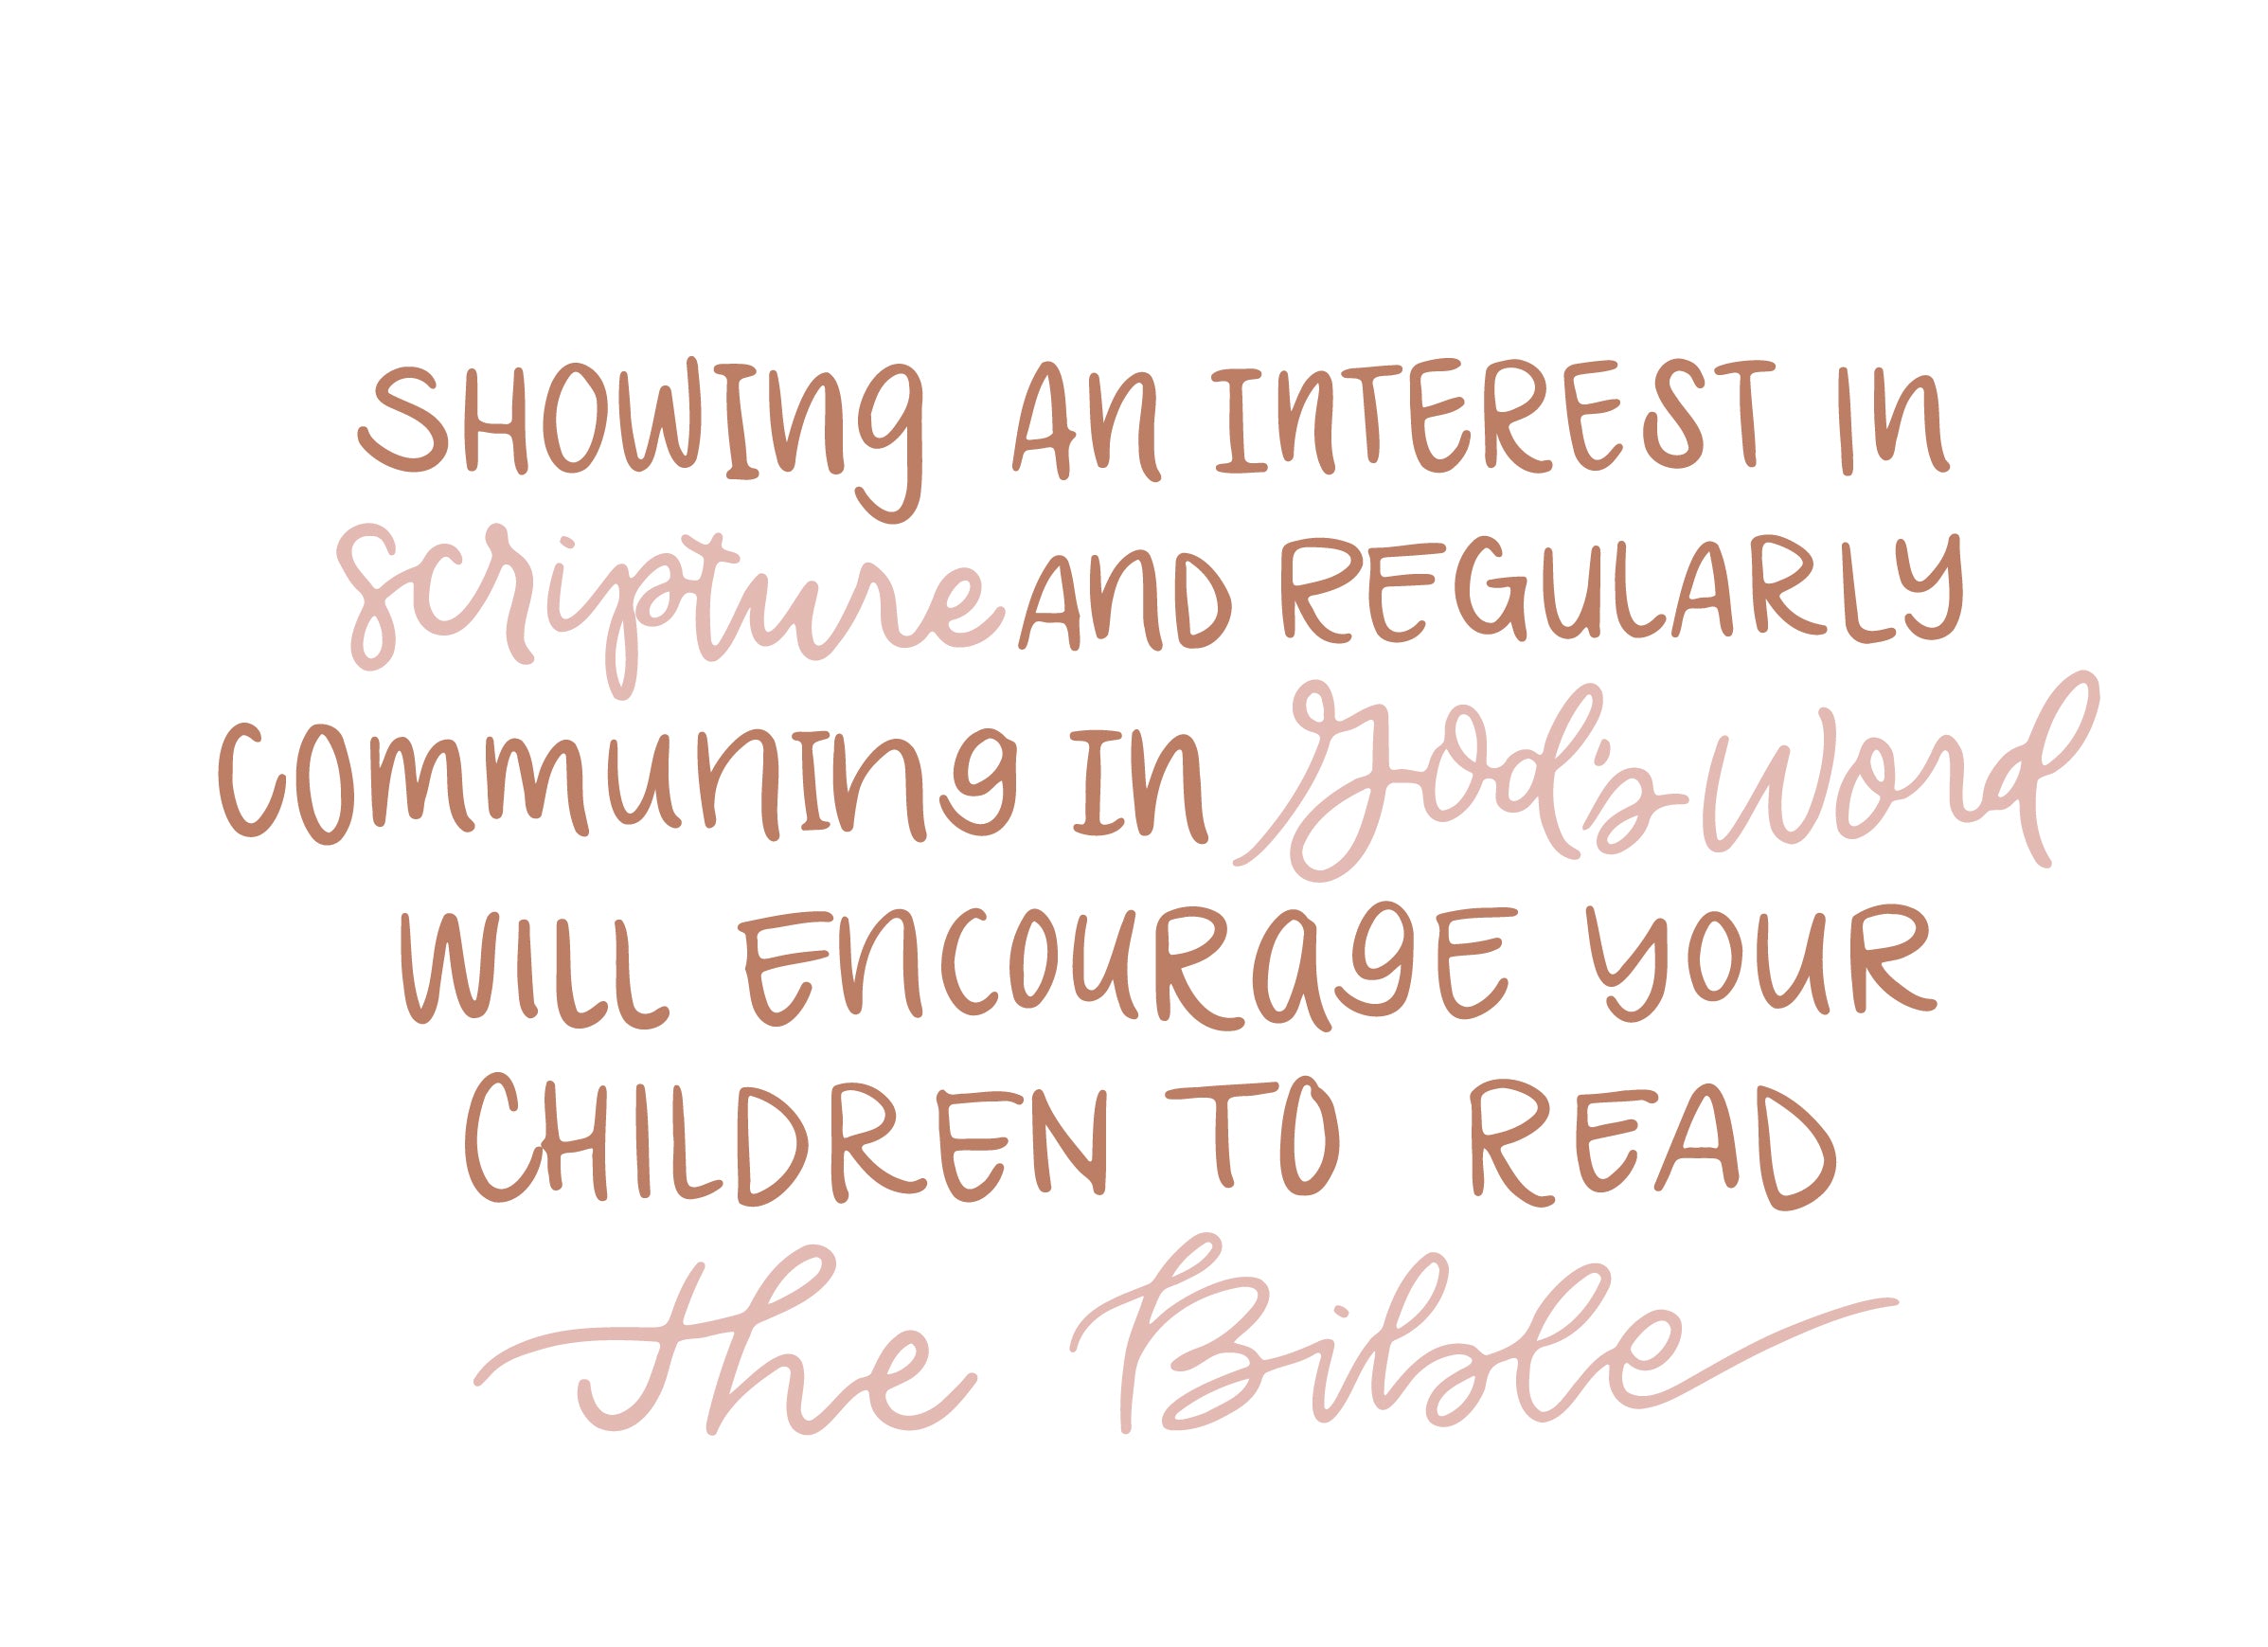 Showing an interest in reading God’s Word will encourage your children to read the Bible | TDGC